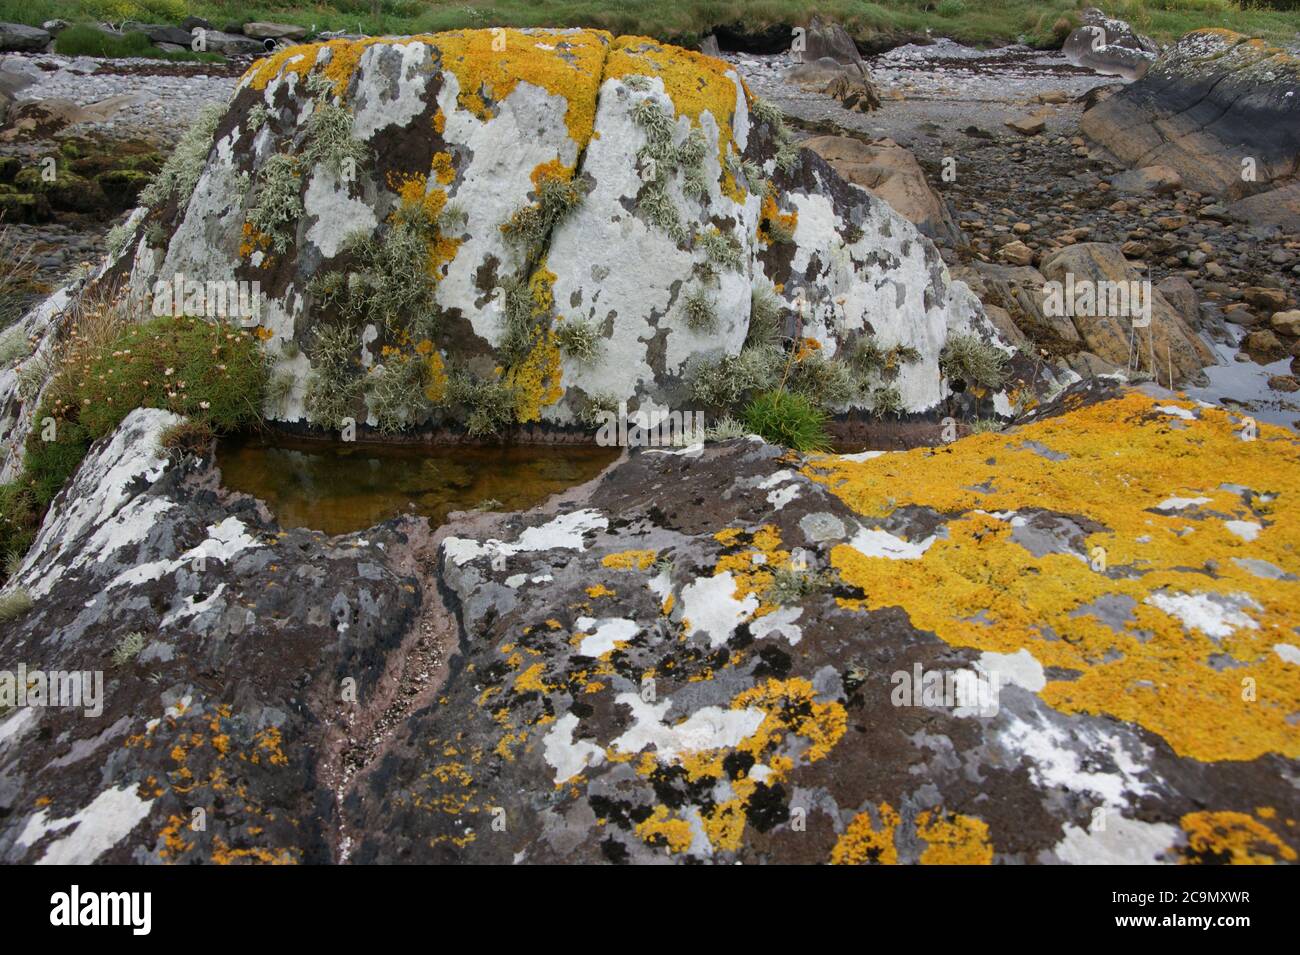 Lichen and rock pools washes by the Atlantic along Ireland's Wild Atlantic Way. Stock Photo